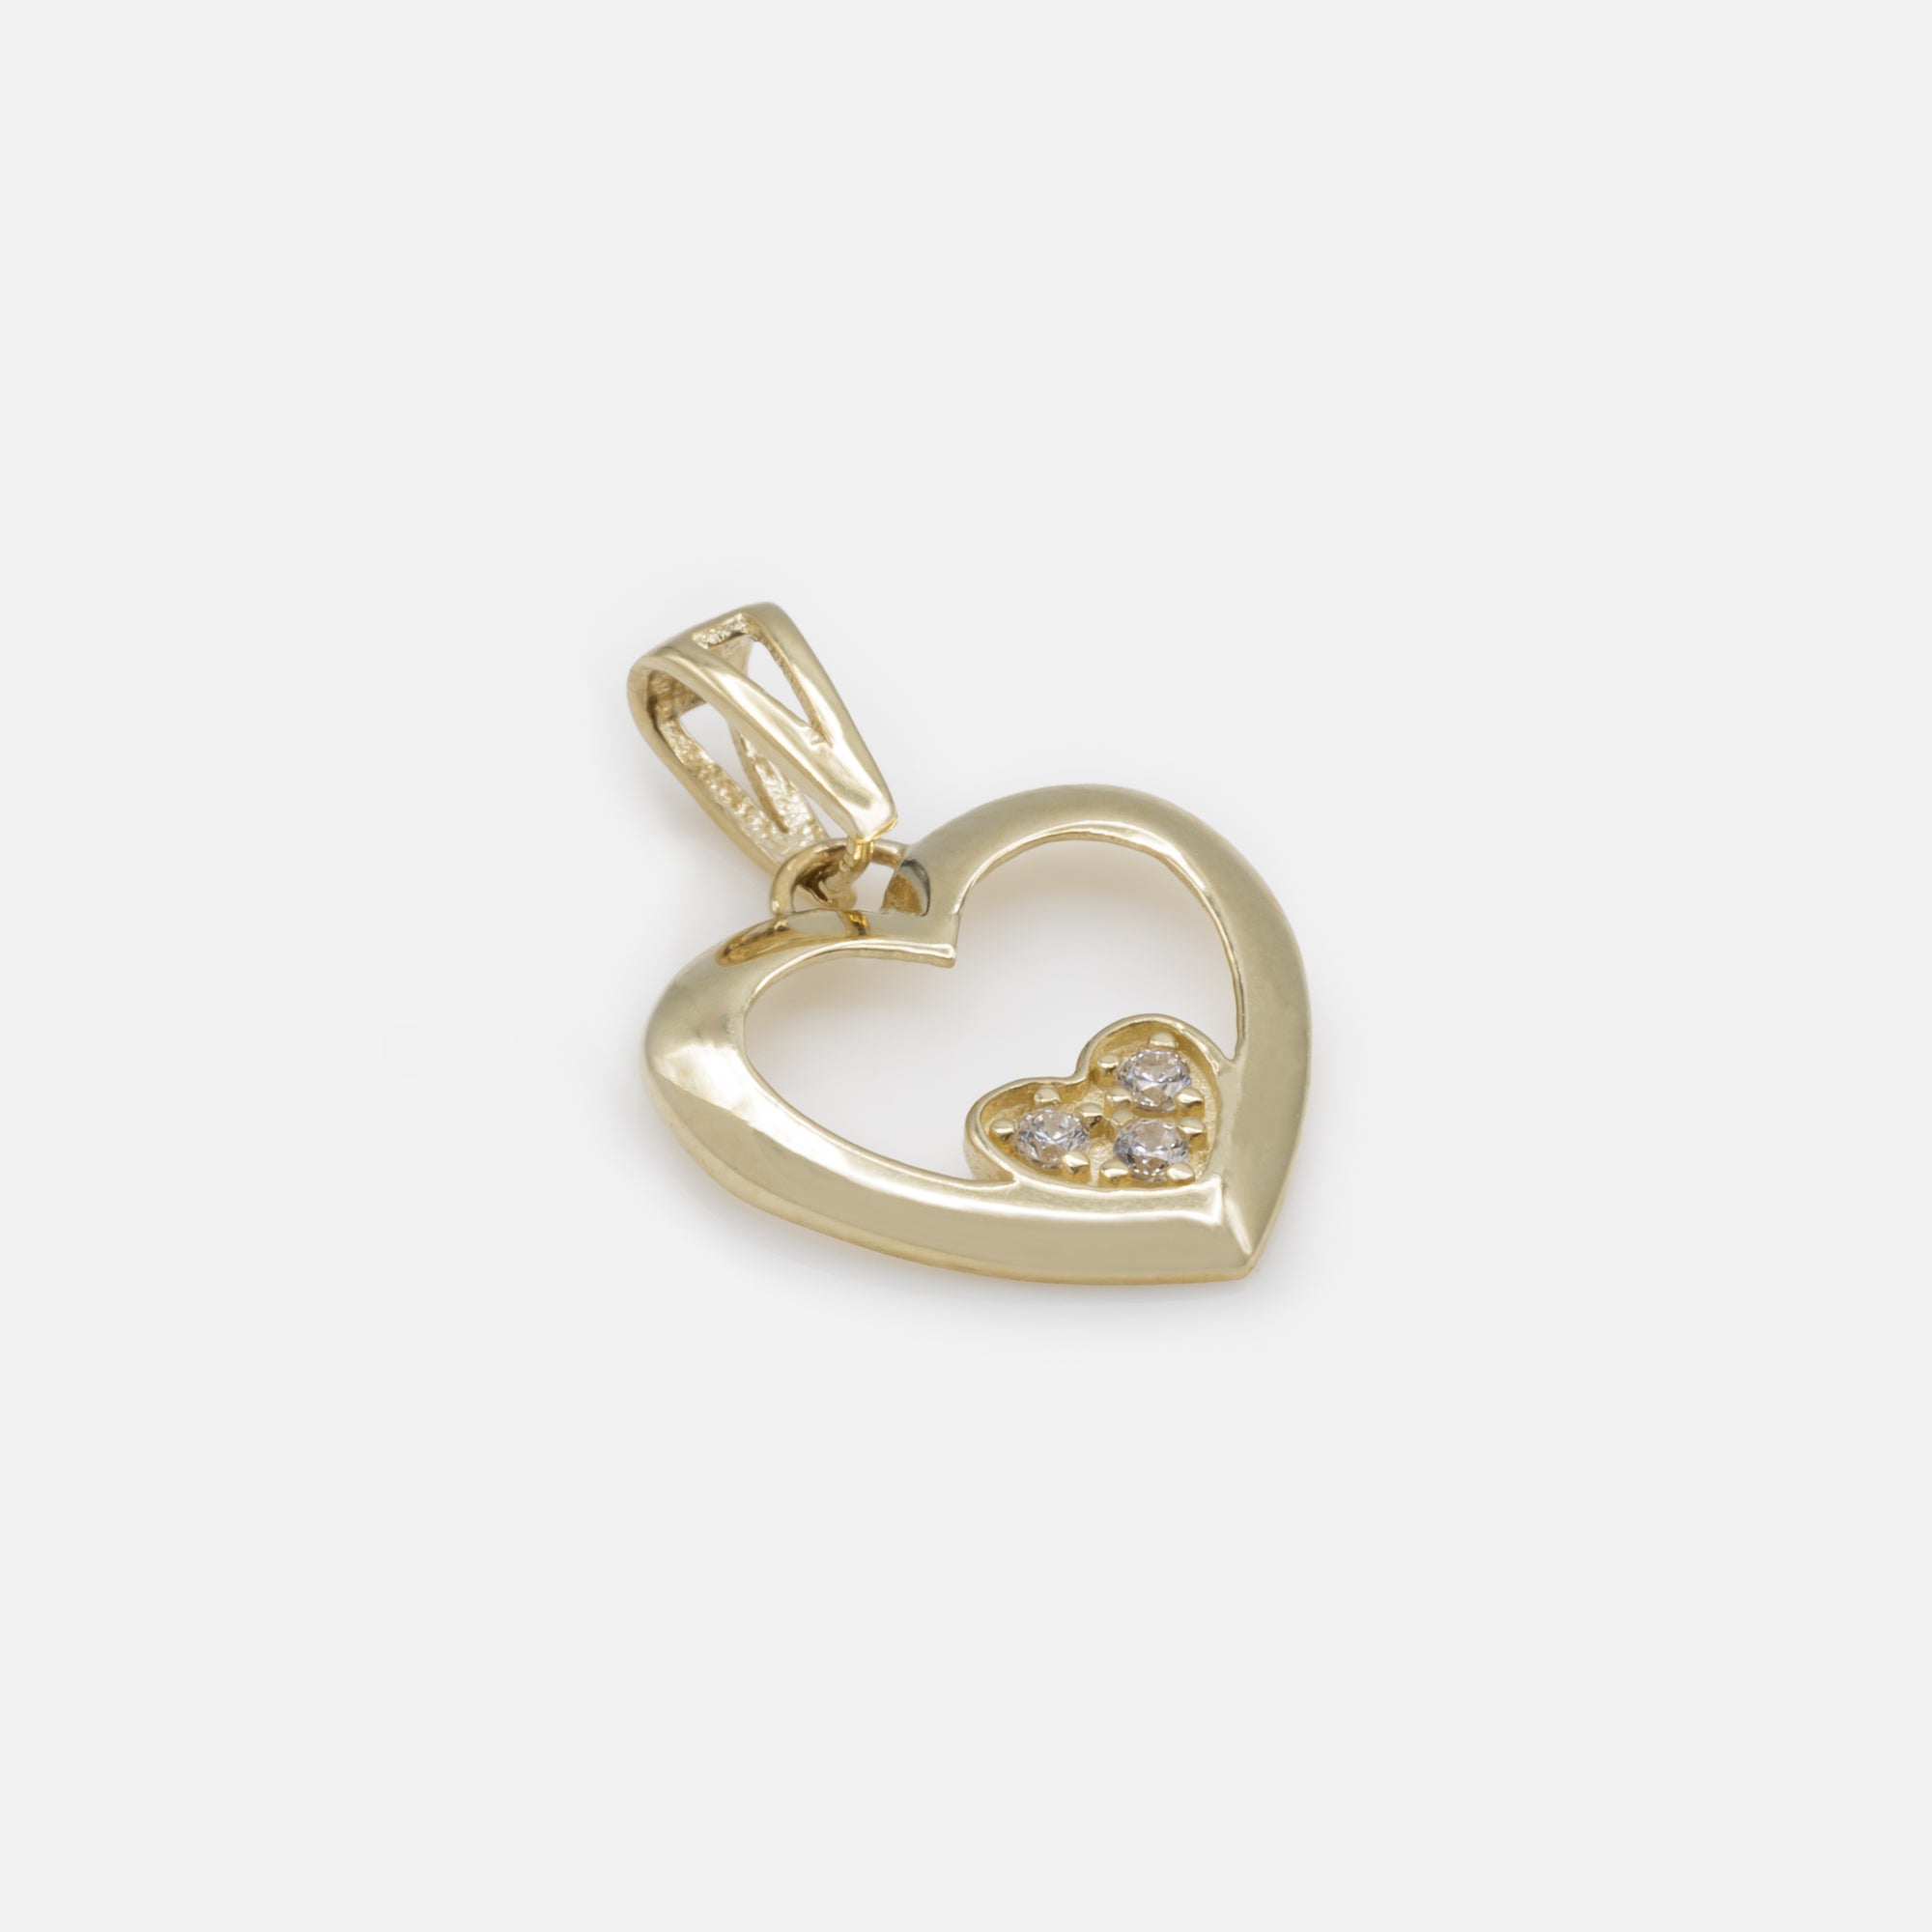 Two hearts and three cubic zirconia charm in 10k gold